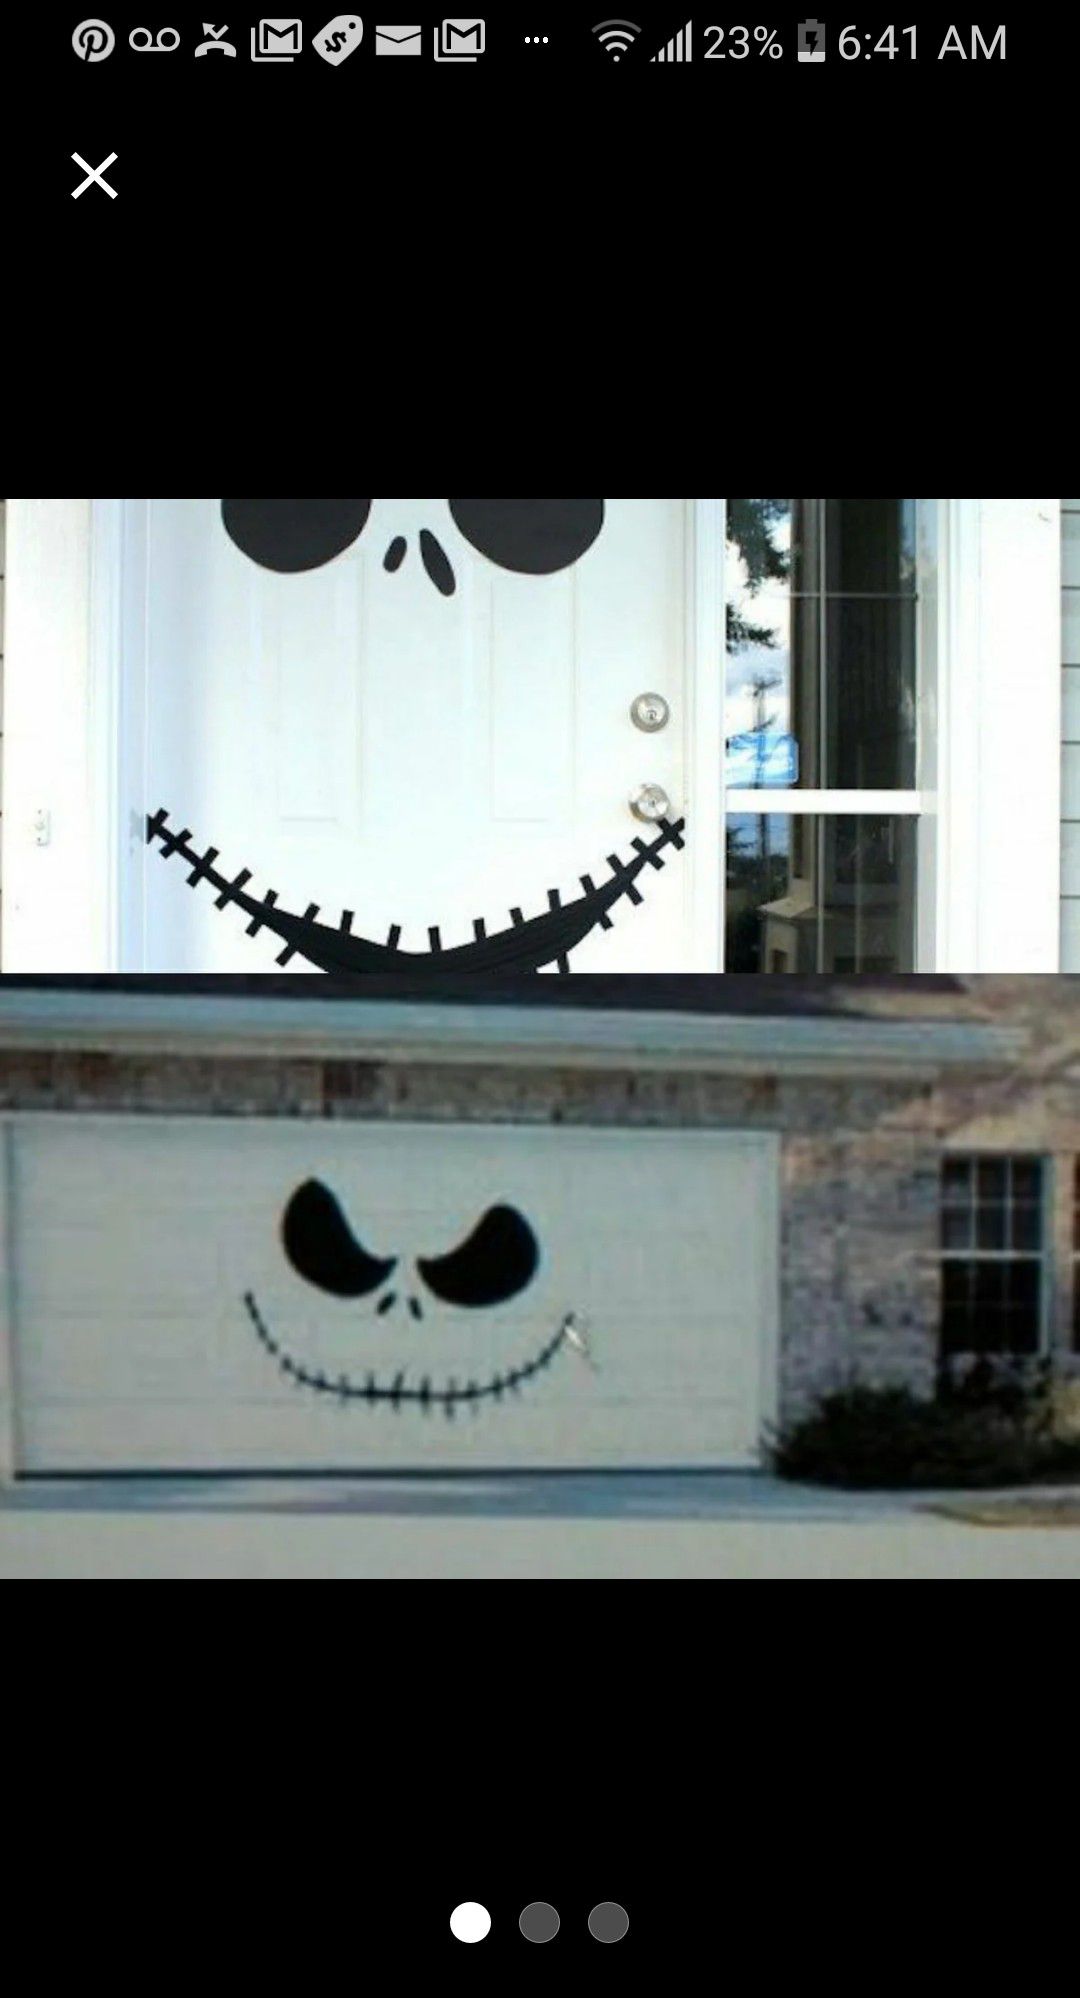 Halloween decor comes with garage and front door decal decor